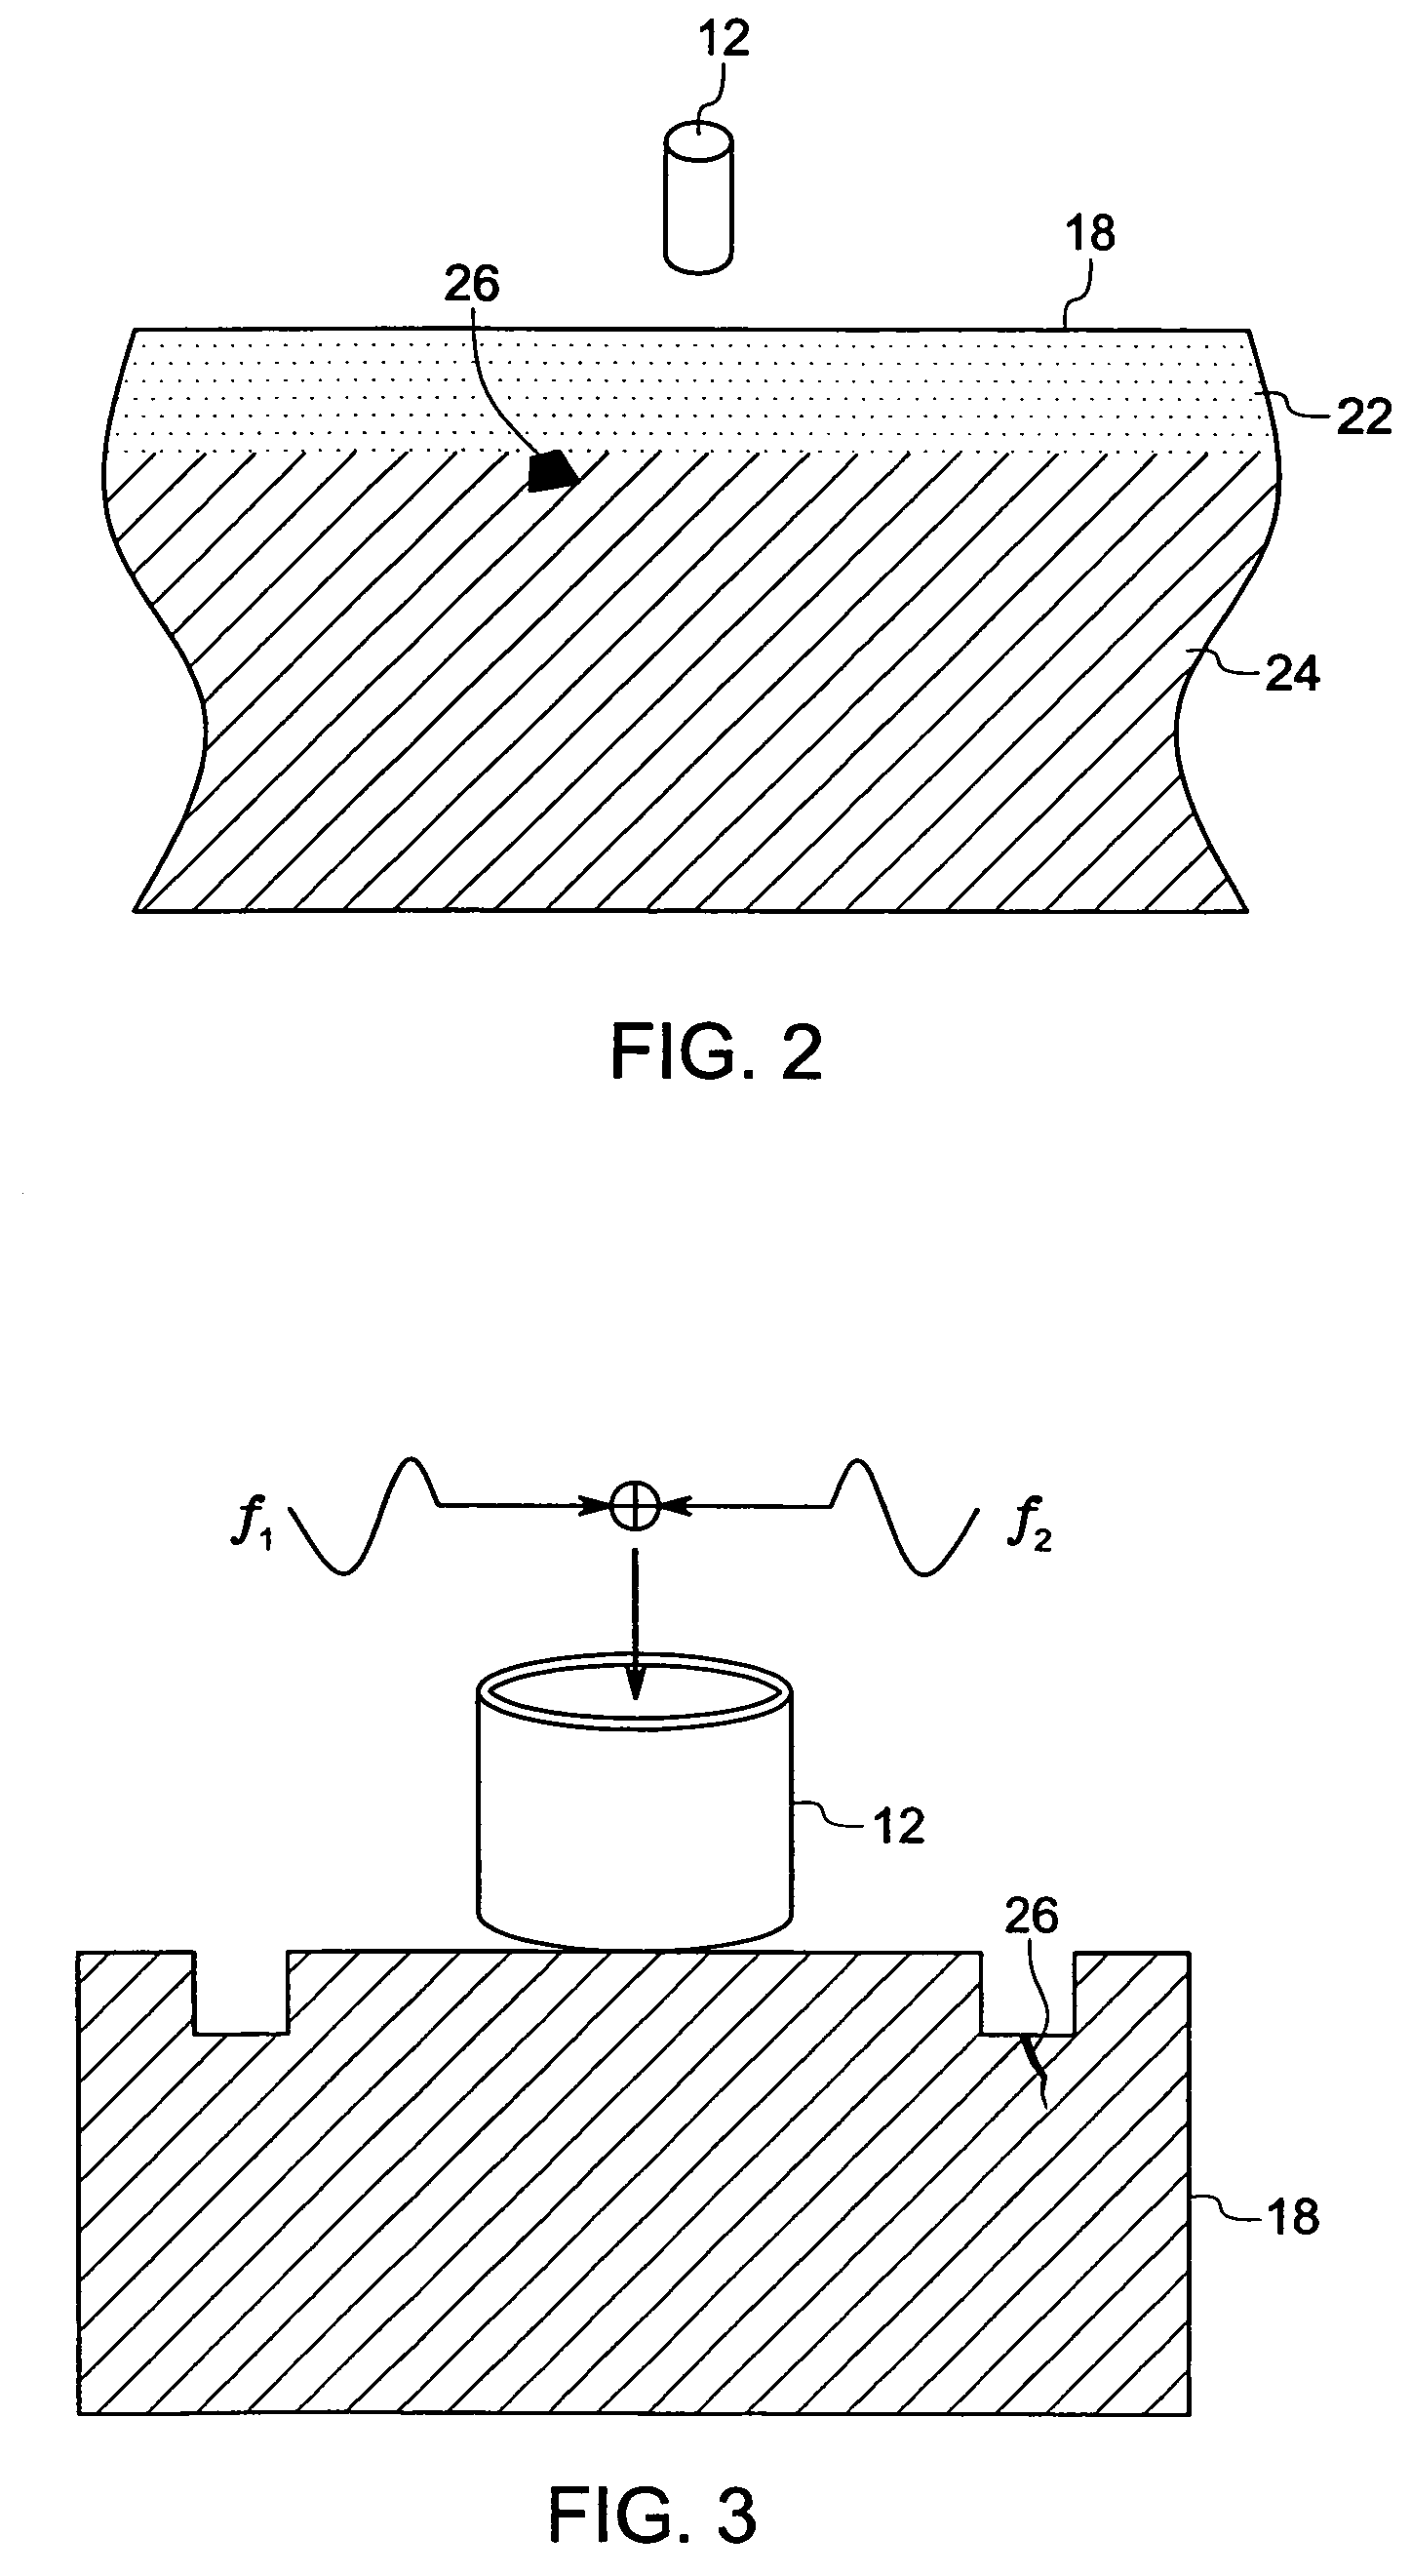 Inspection method and system using multifrequency phase analysis